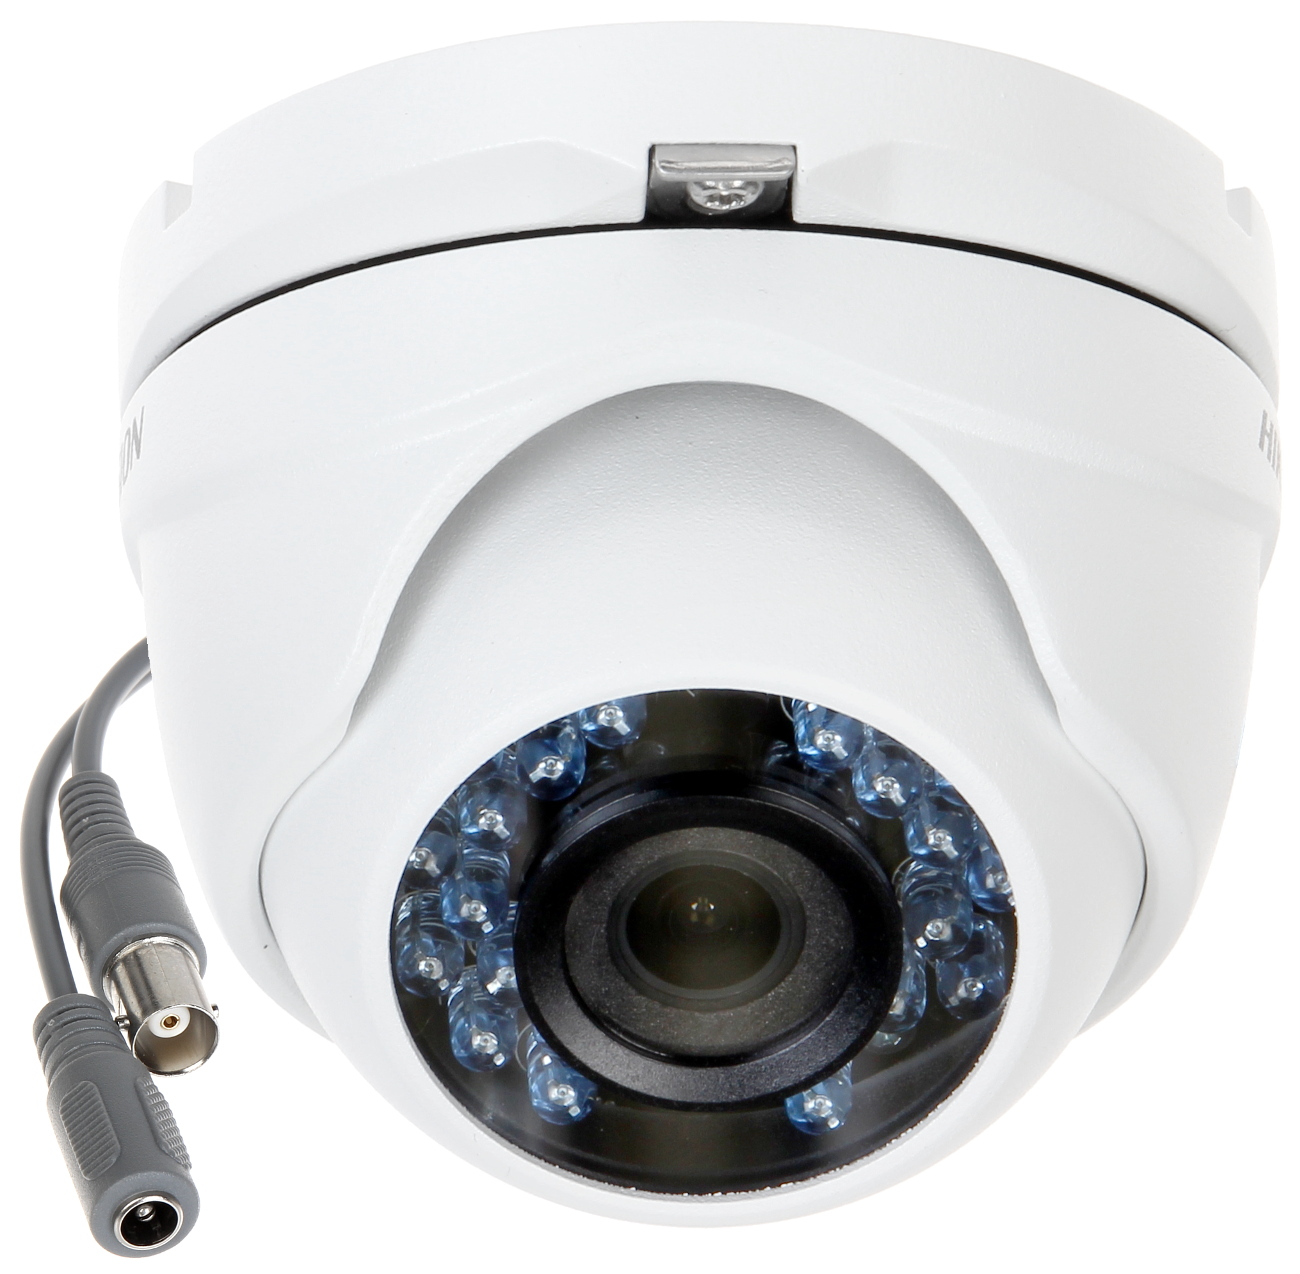 HD-TVI CAMERA DS-2CE56D0T-IRM(2.8mm) - 1080p Hikvision - Cameras with  Fixed-Focal Lens, Dome Type, up to 8.3 Mpx - Delta